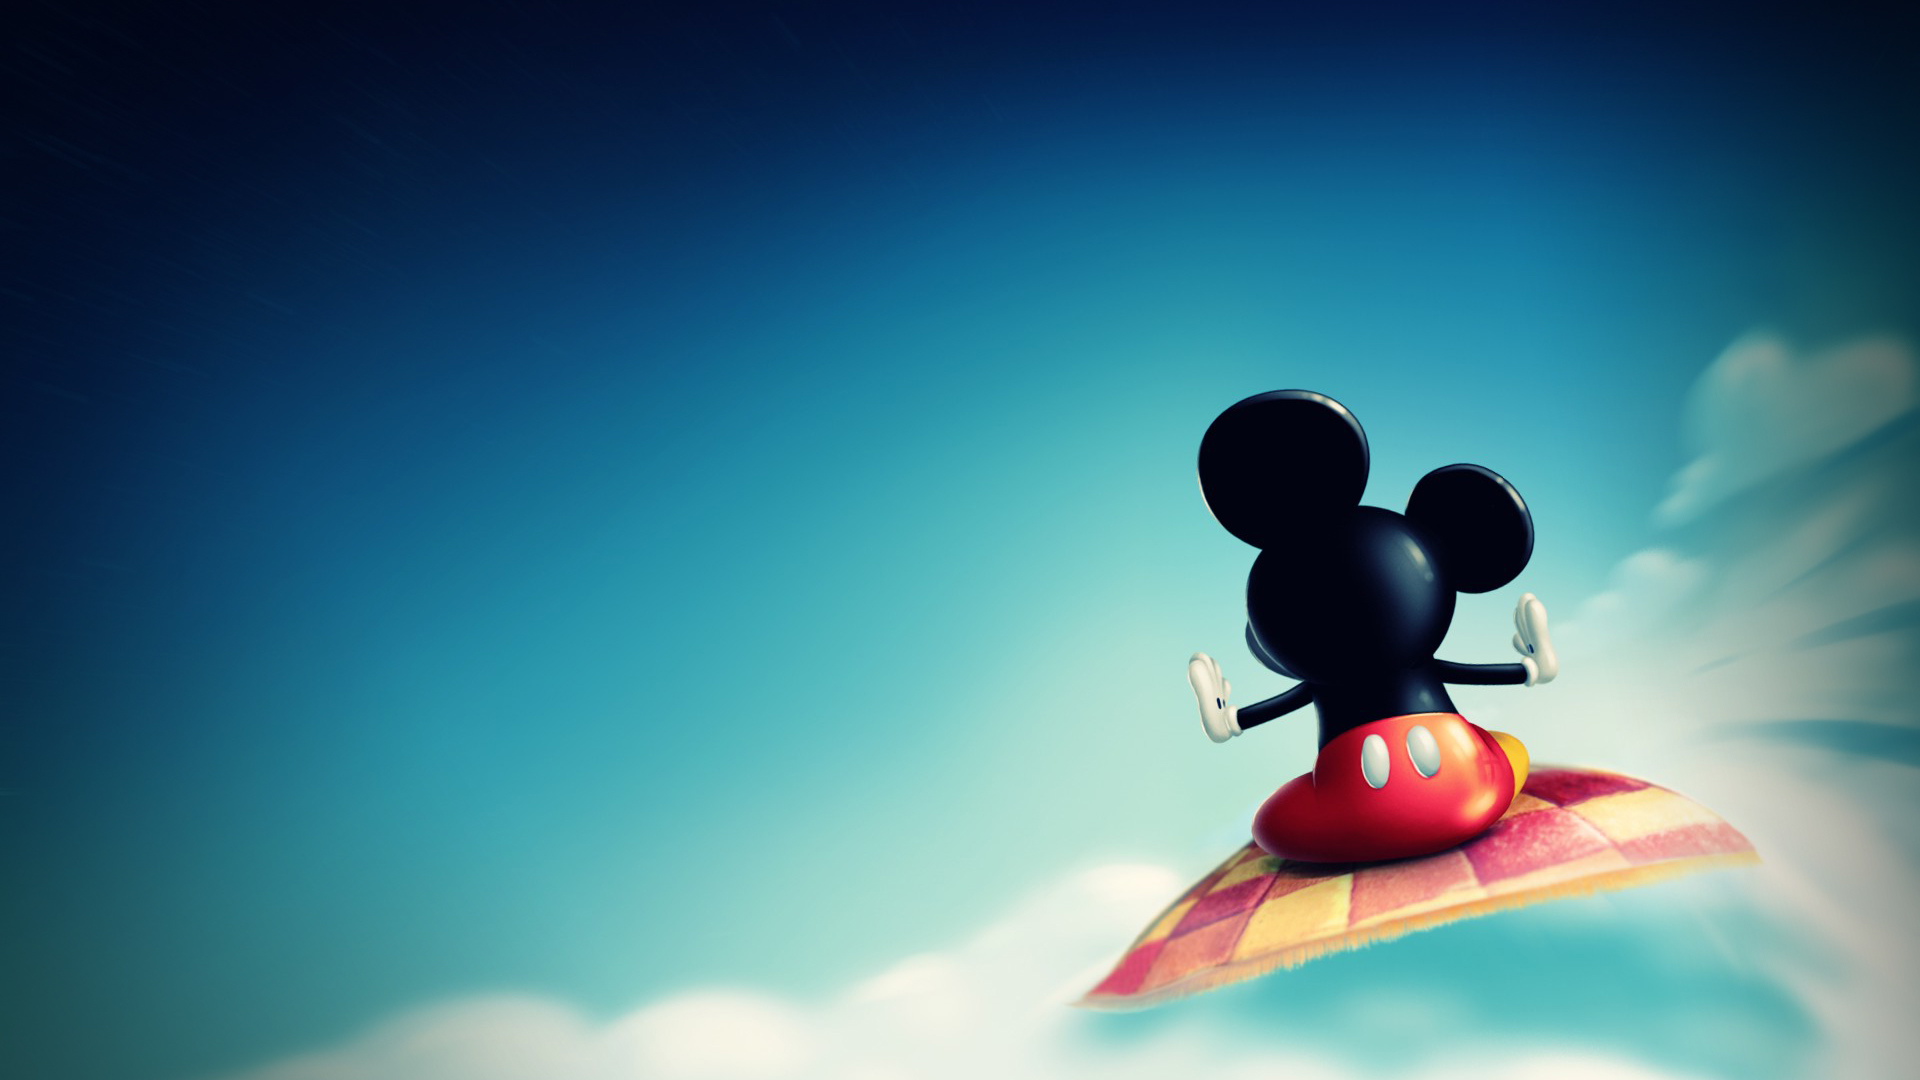 Mickey Mouse Wallpaper Full HD 1080p